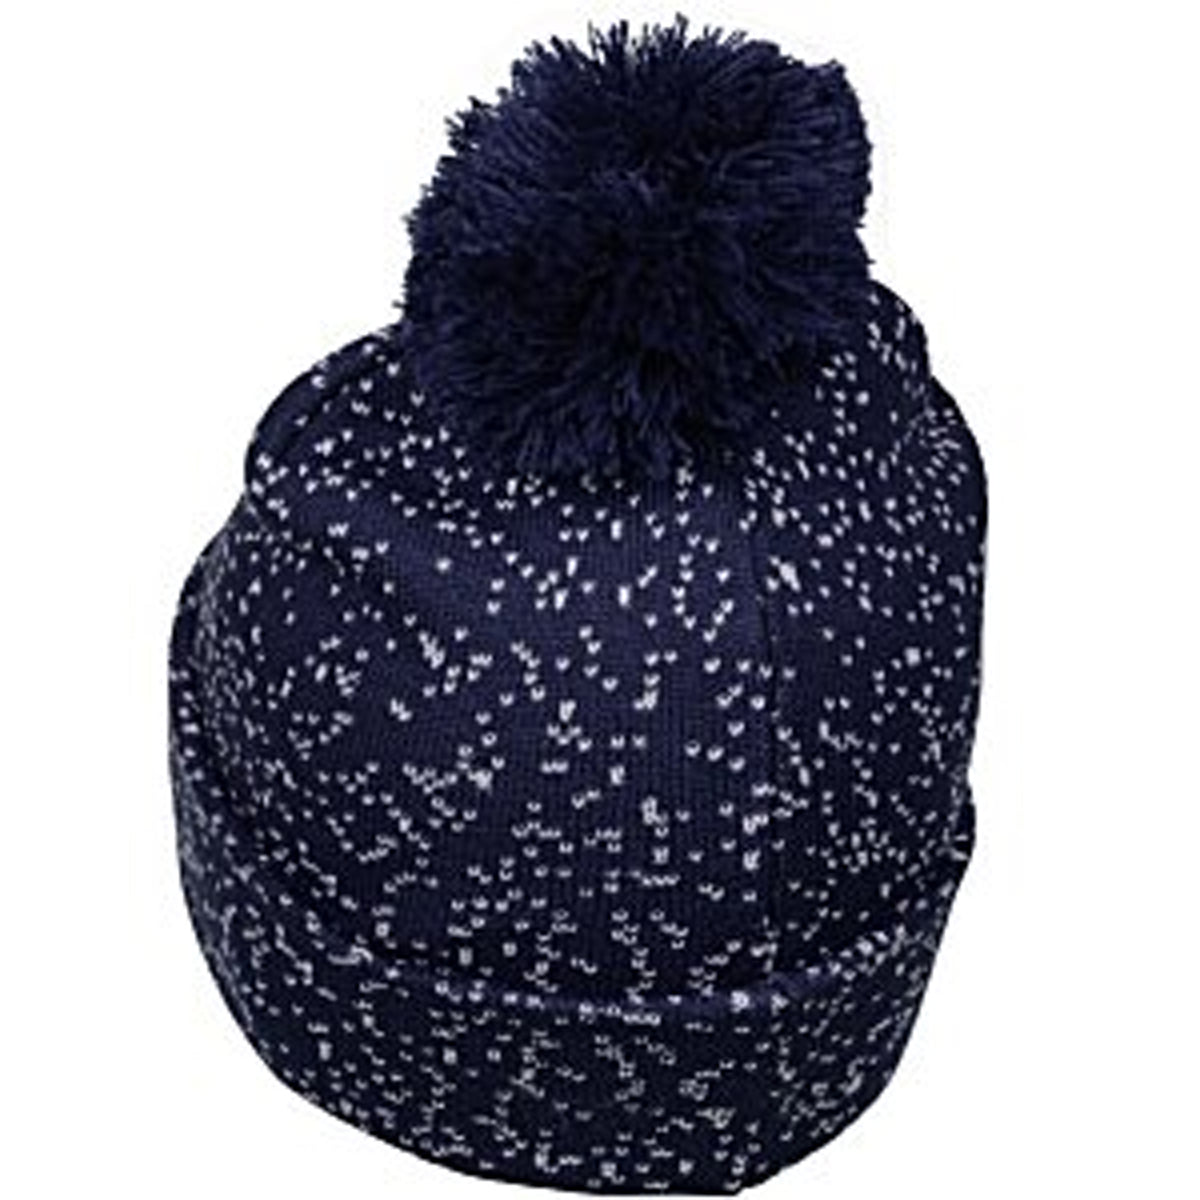 Winter Beanie Speckled Pom with Cuff Blank In Bulk- Assorted